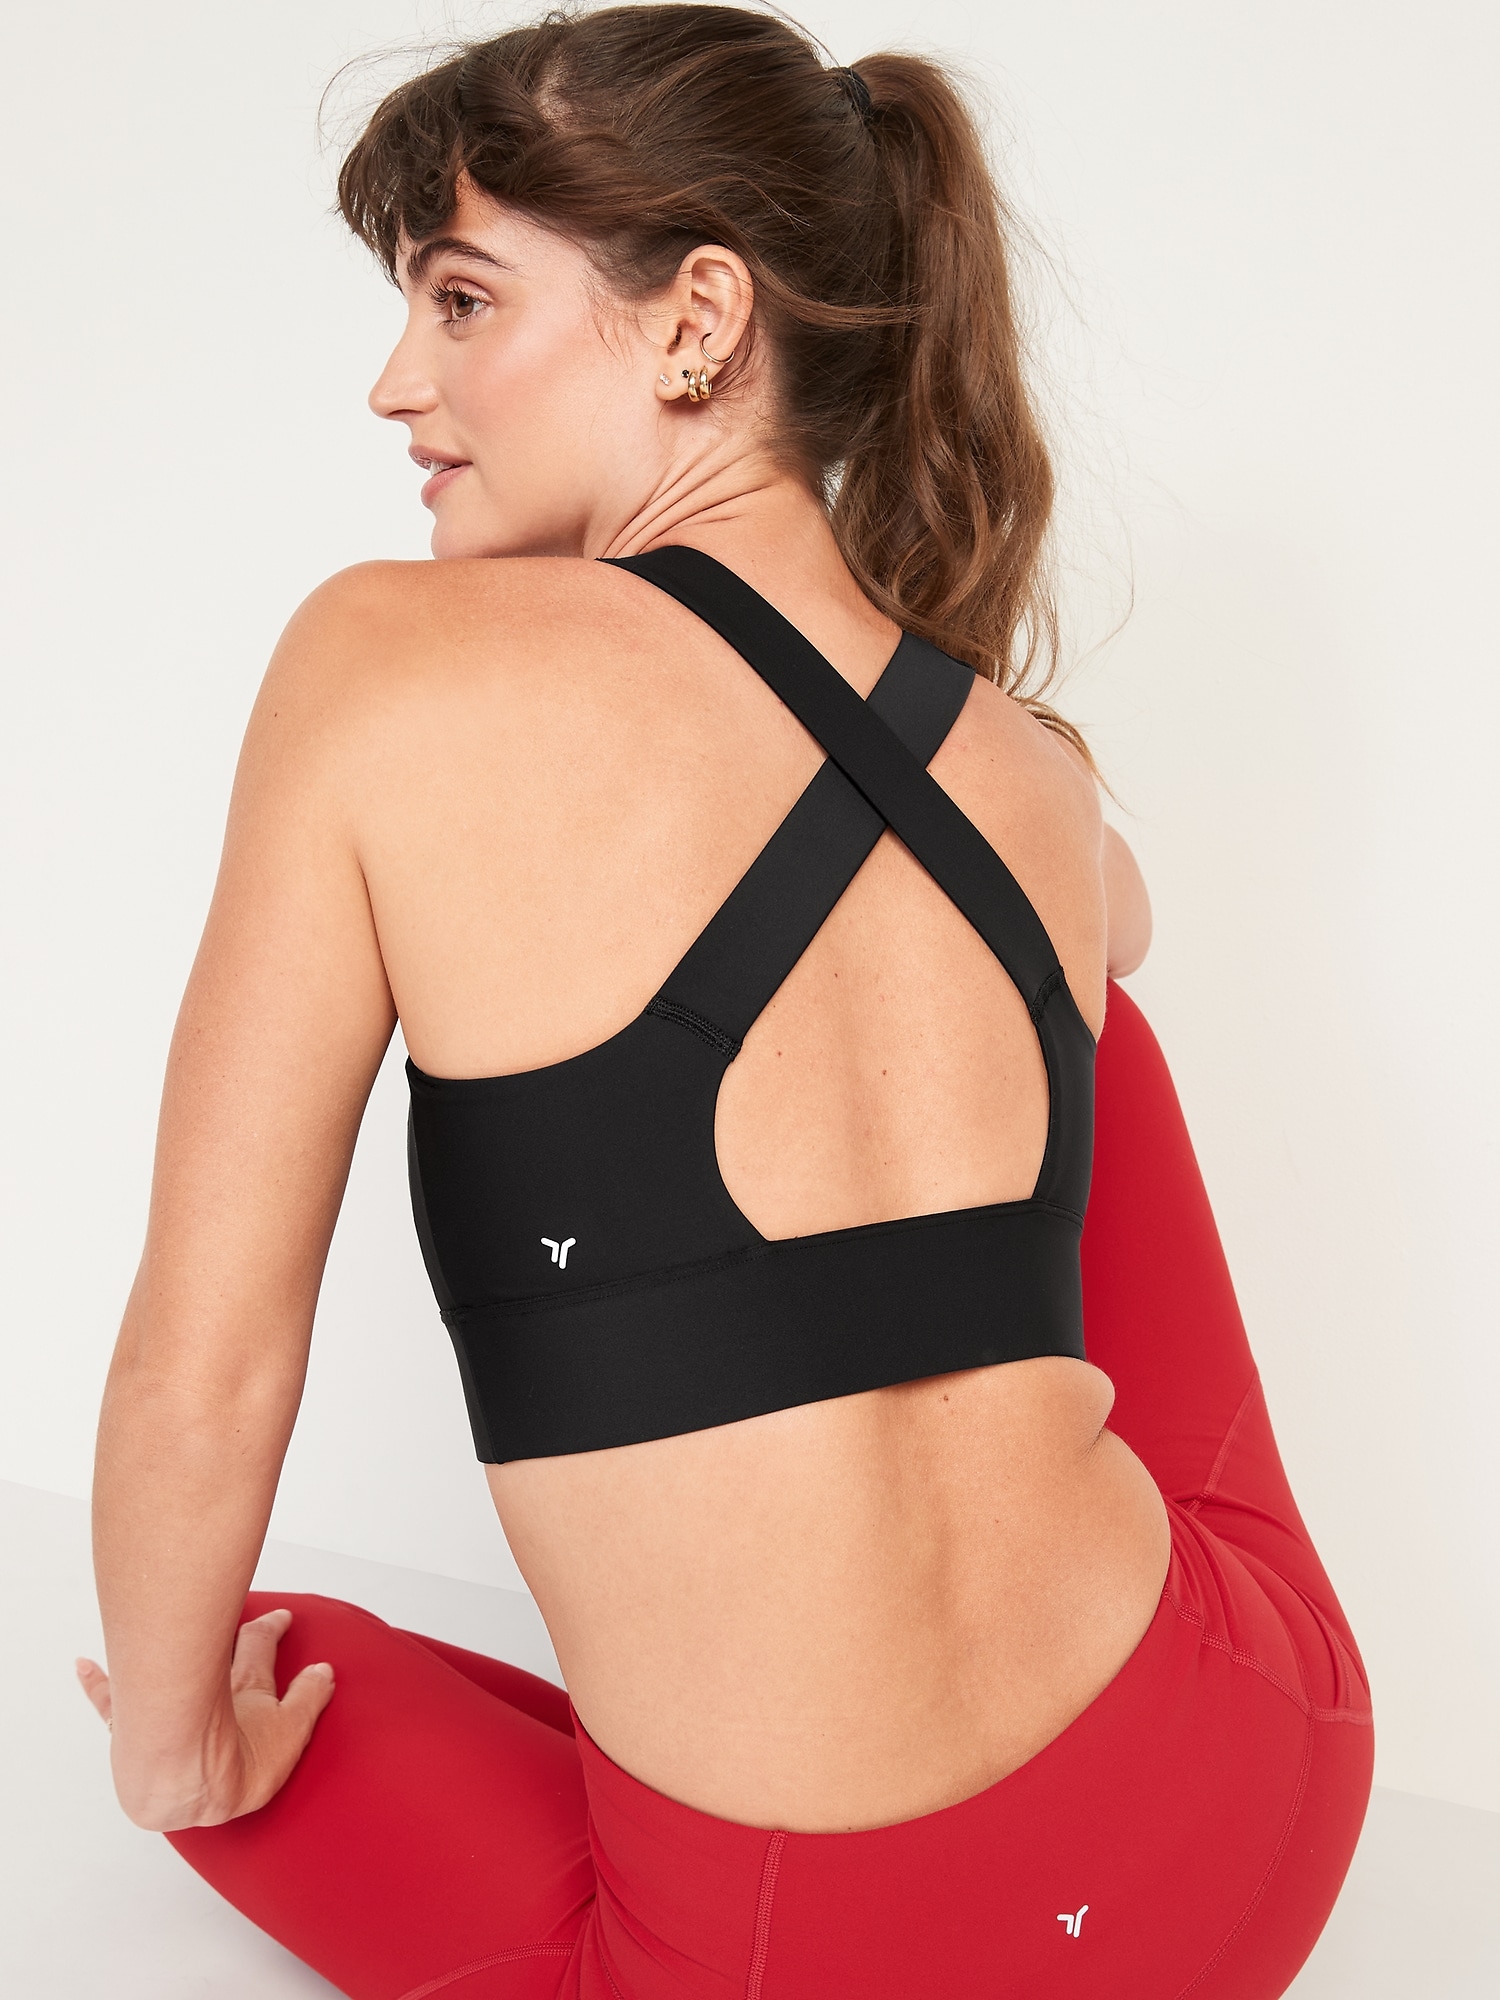 Old Navy Medium Support PowerSoft Sports Bra, 15 Marble Activewear Picks  From Old Navy That'll Totally Rock Your Next Workout